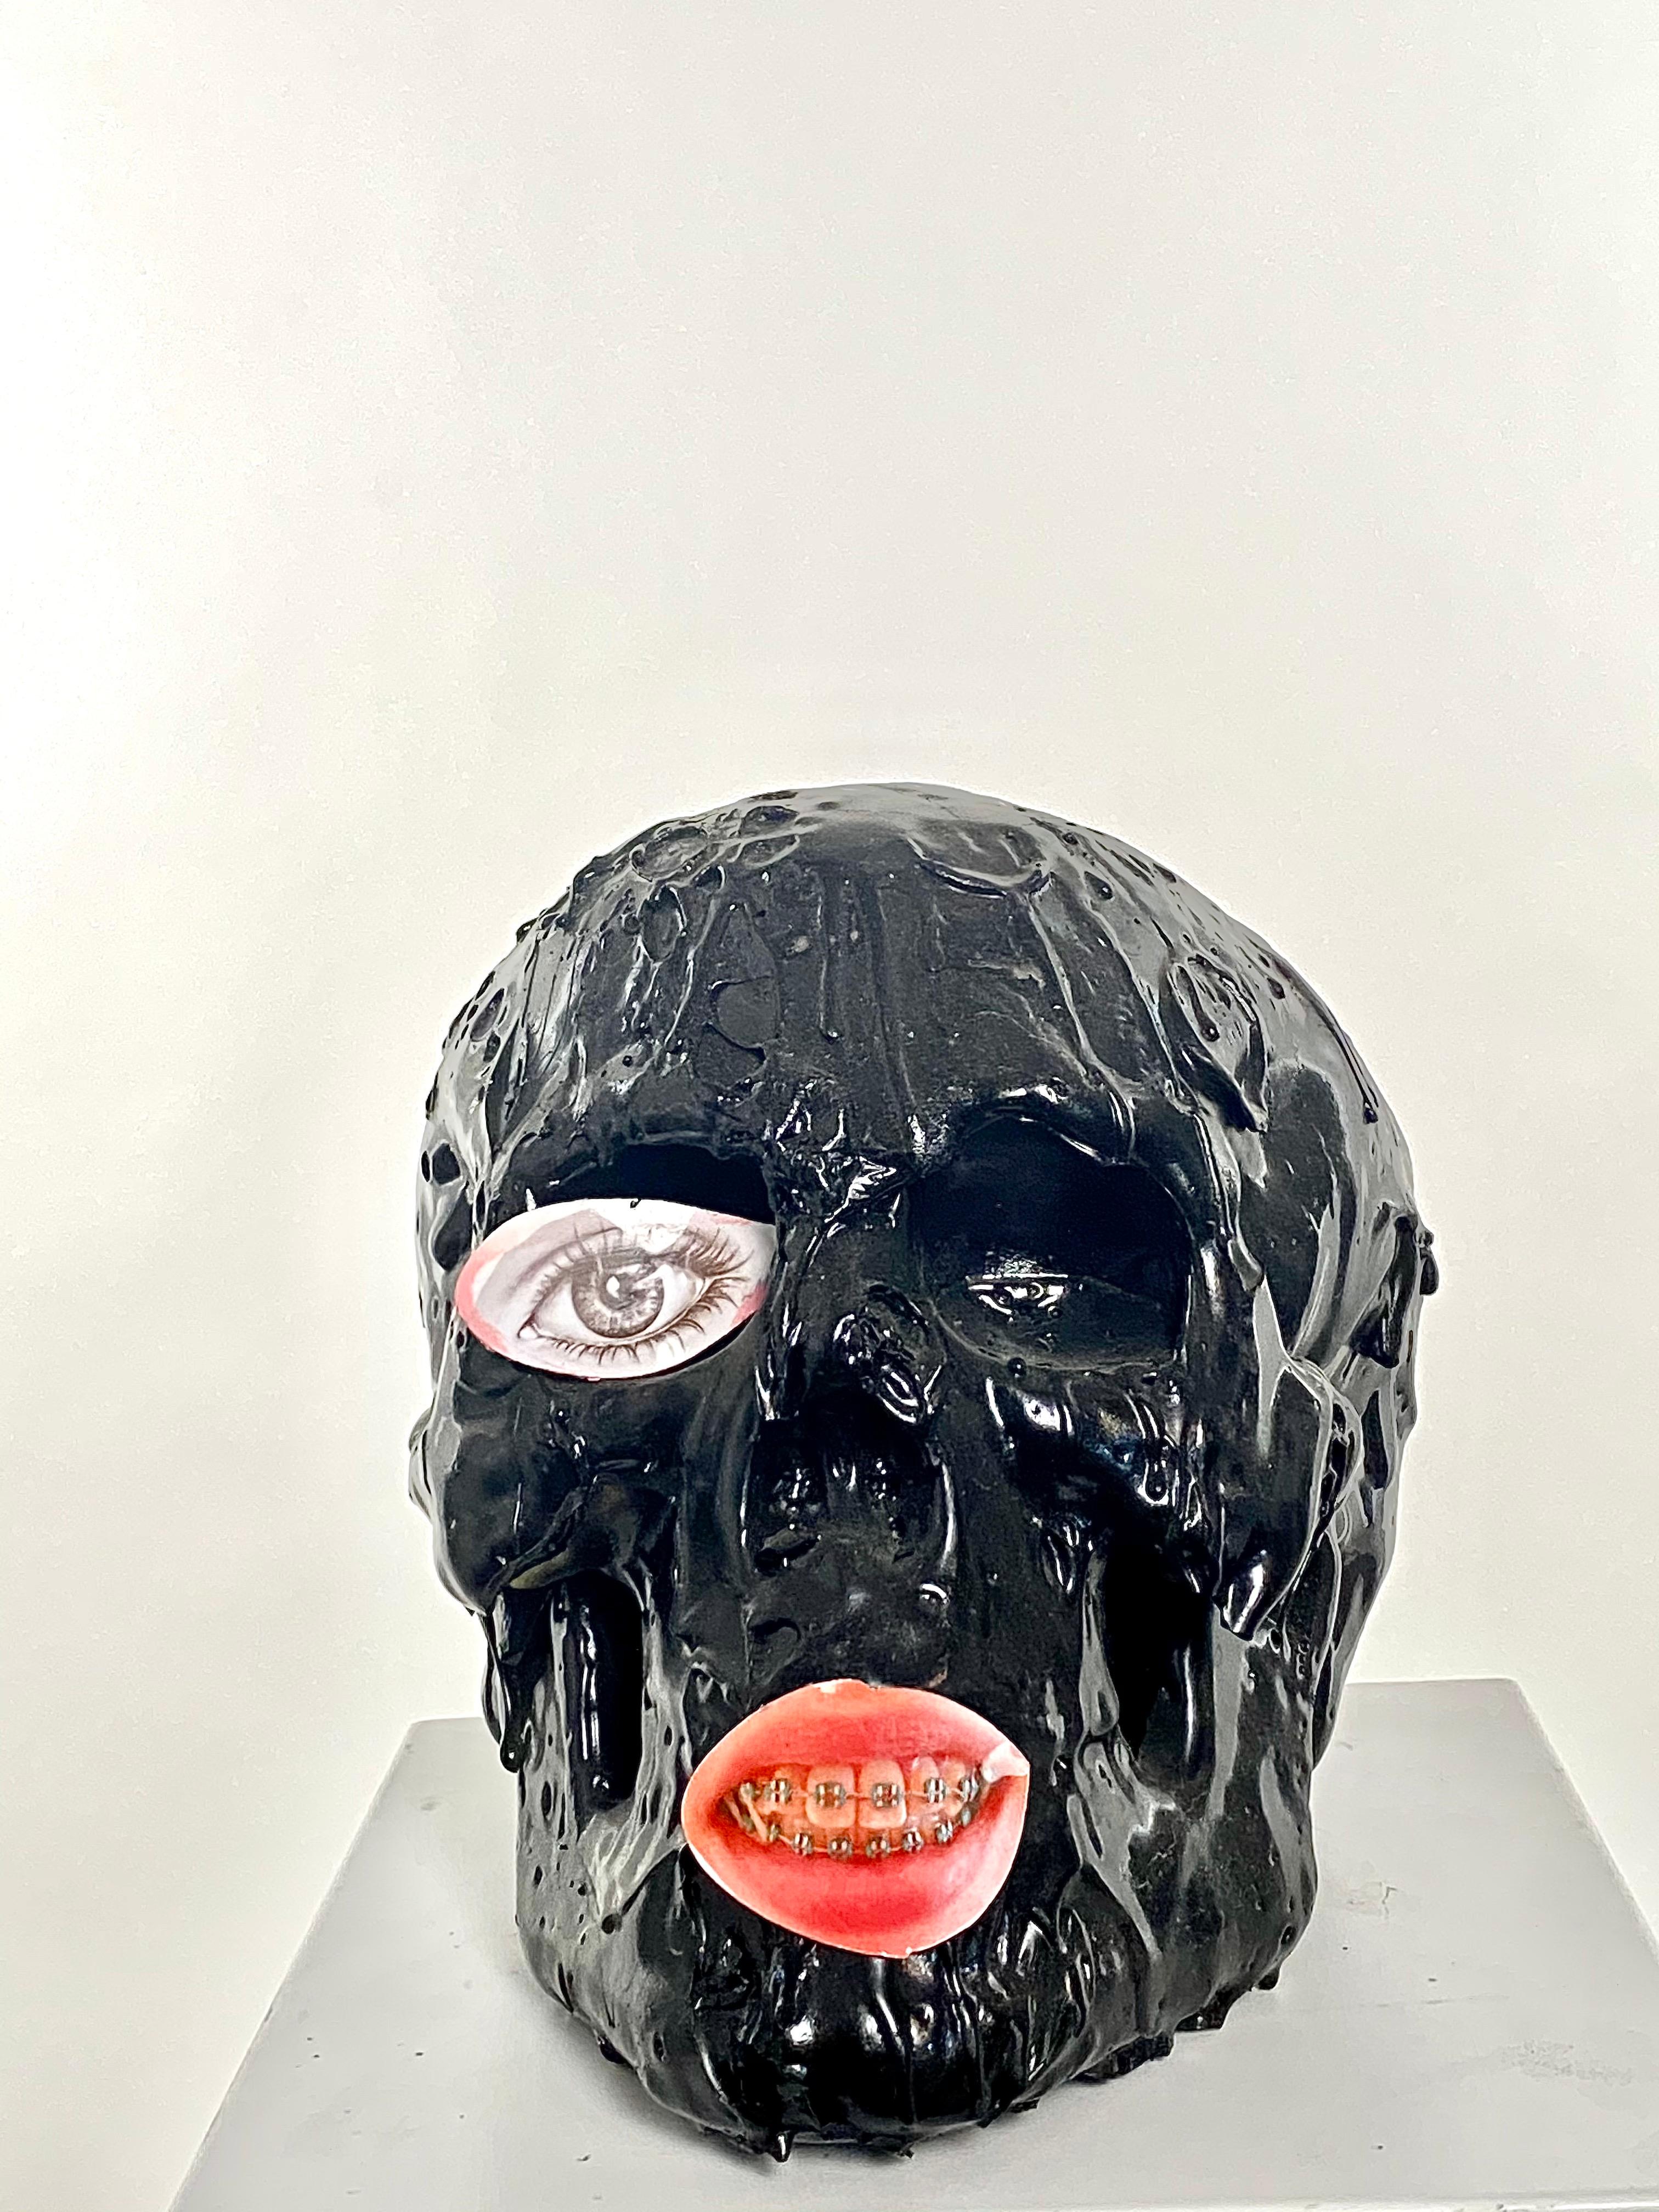 This is a new work by Mattia Biagi
Sculptural Tar skull and print on aluminum eye and mouth.
  